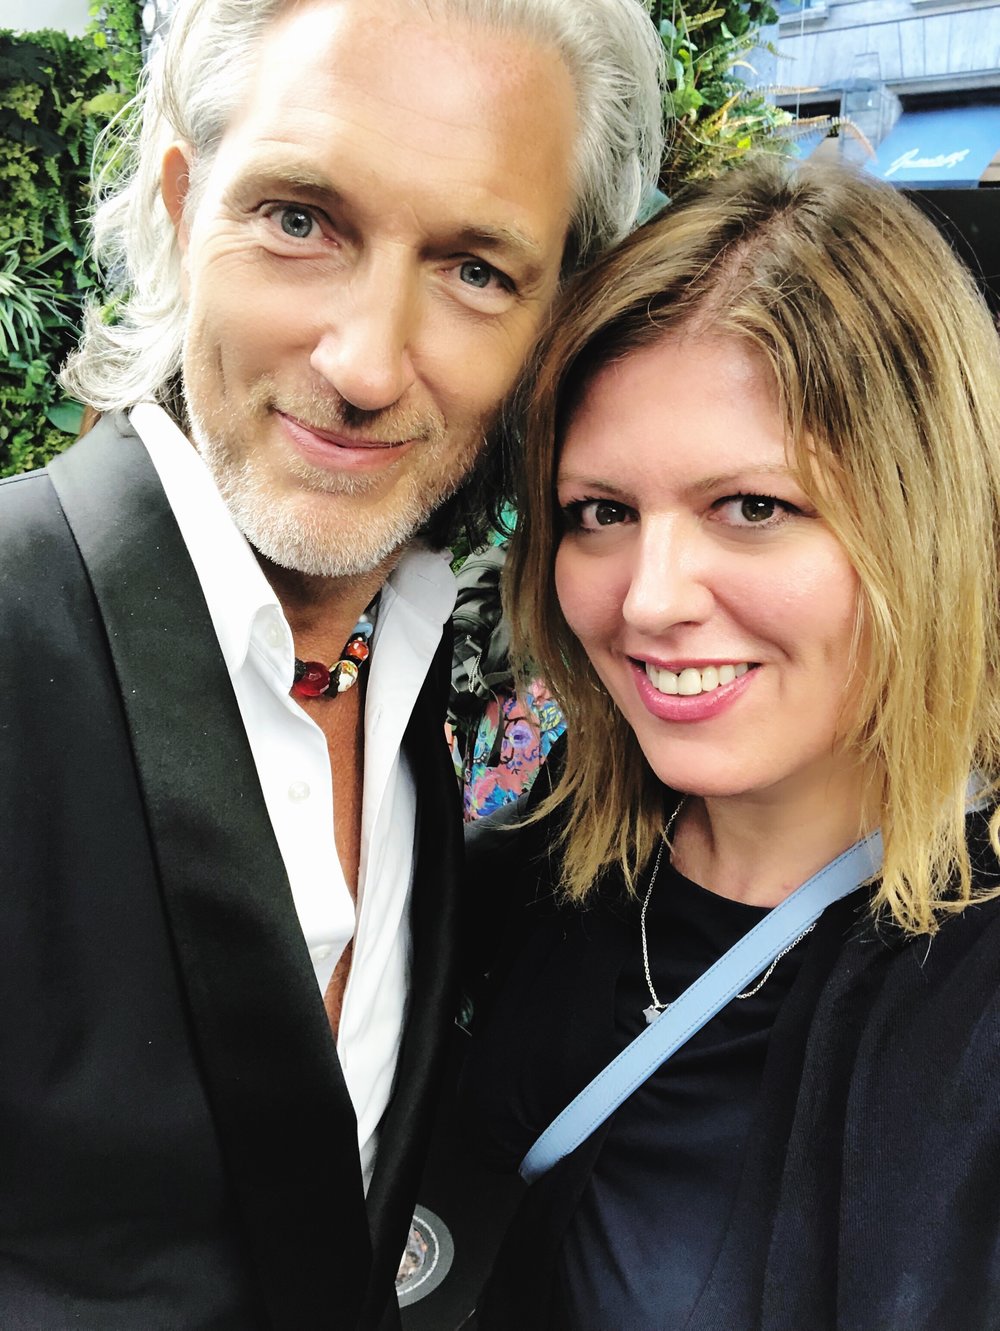 Marcel Wanders and Holly Becker